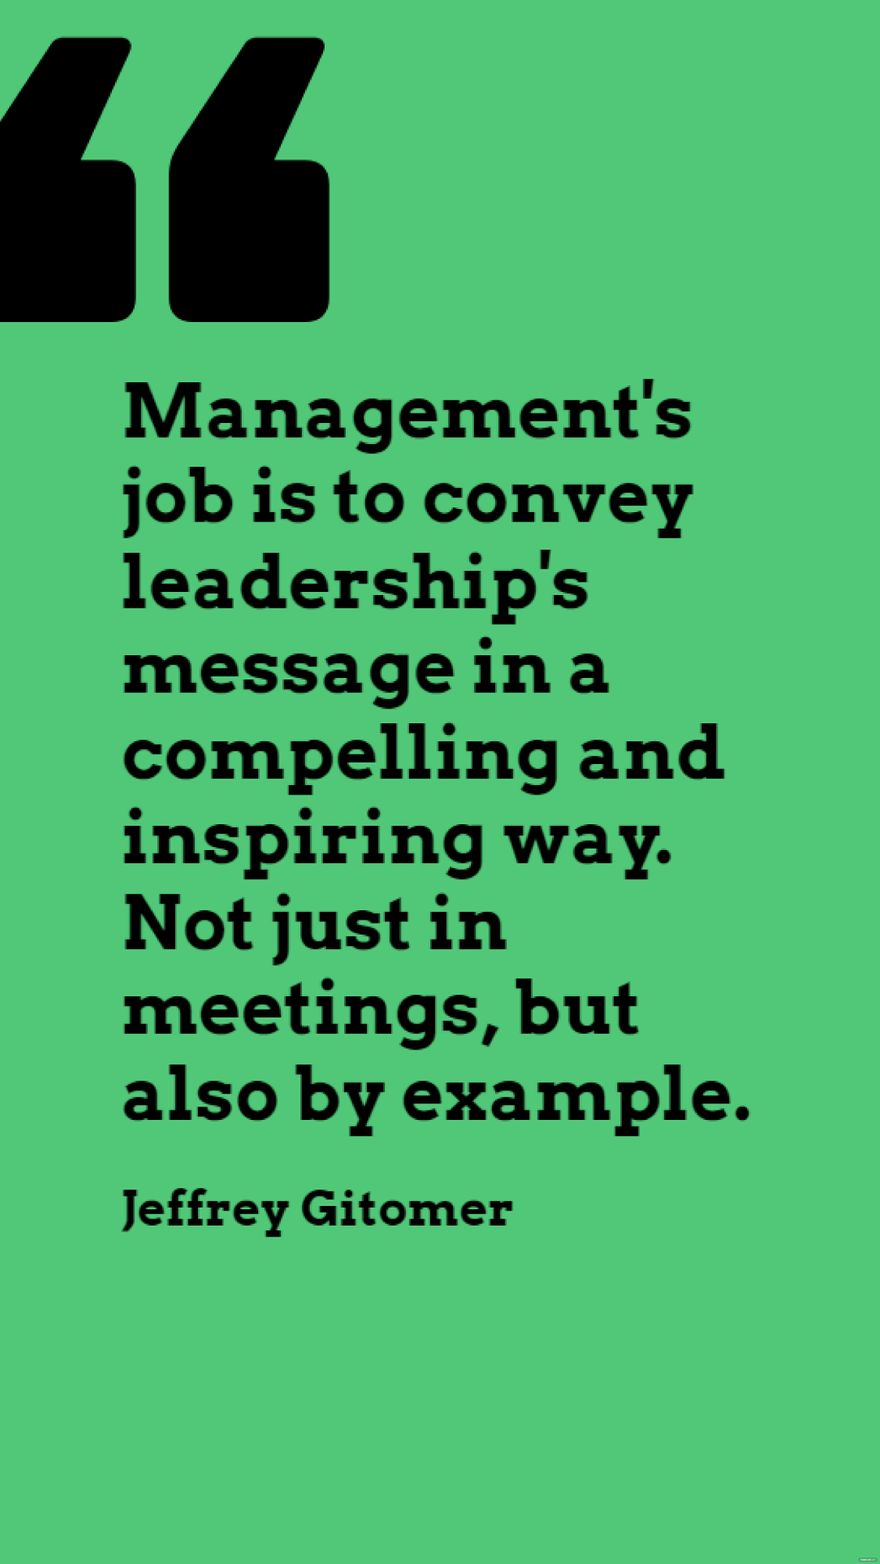 Jeffrey Gitomer - Management's job is to convey leadership's message in a compelling and inspiring way. Not just in meetings, but also by example.